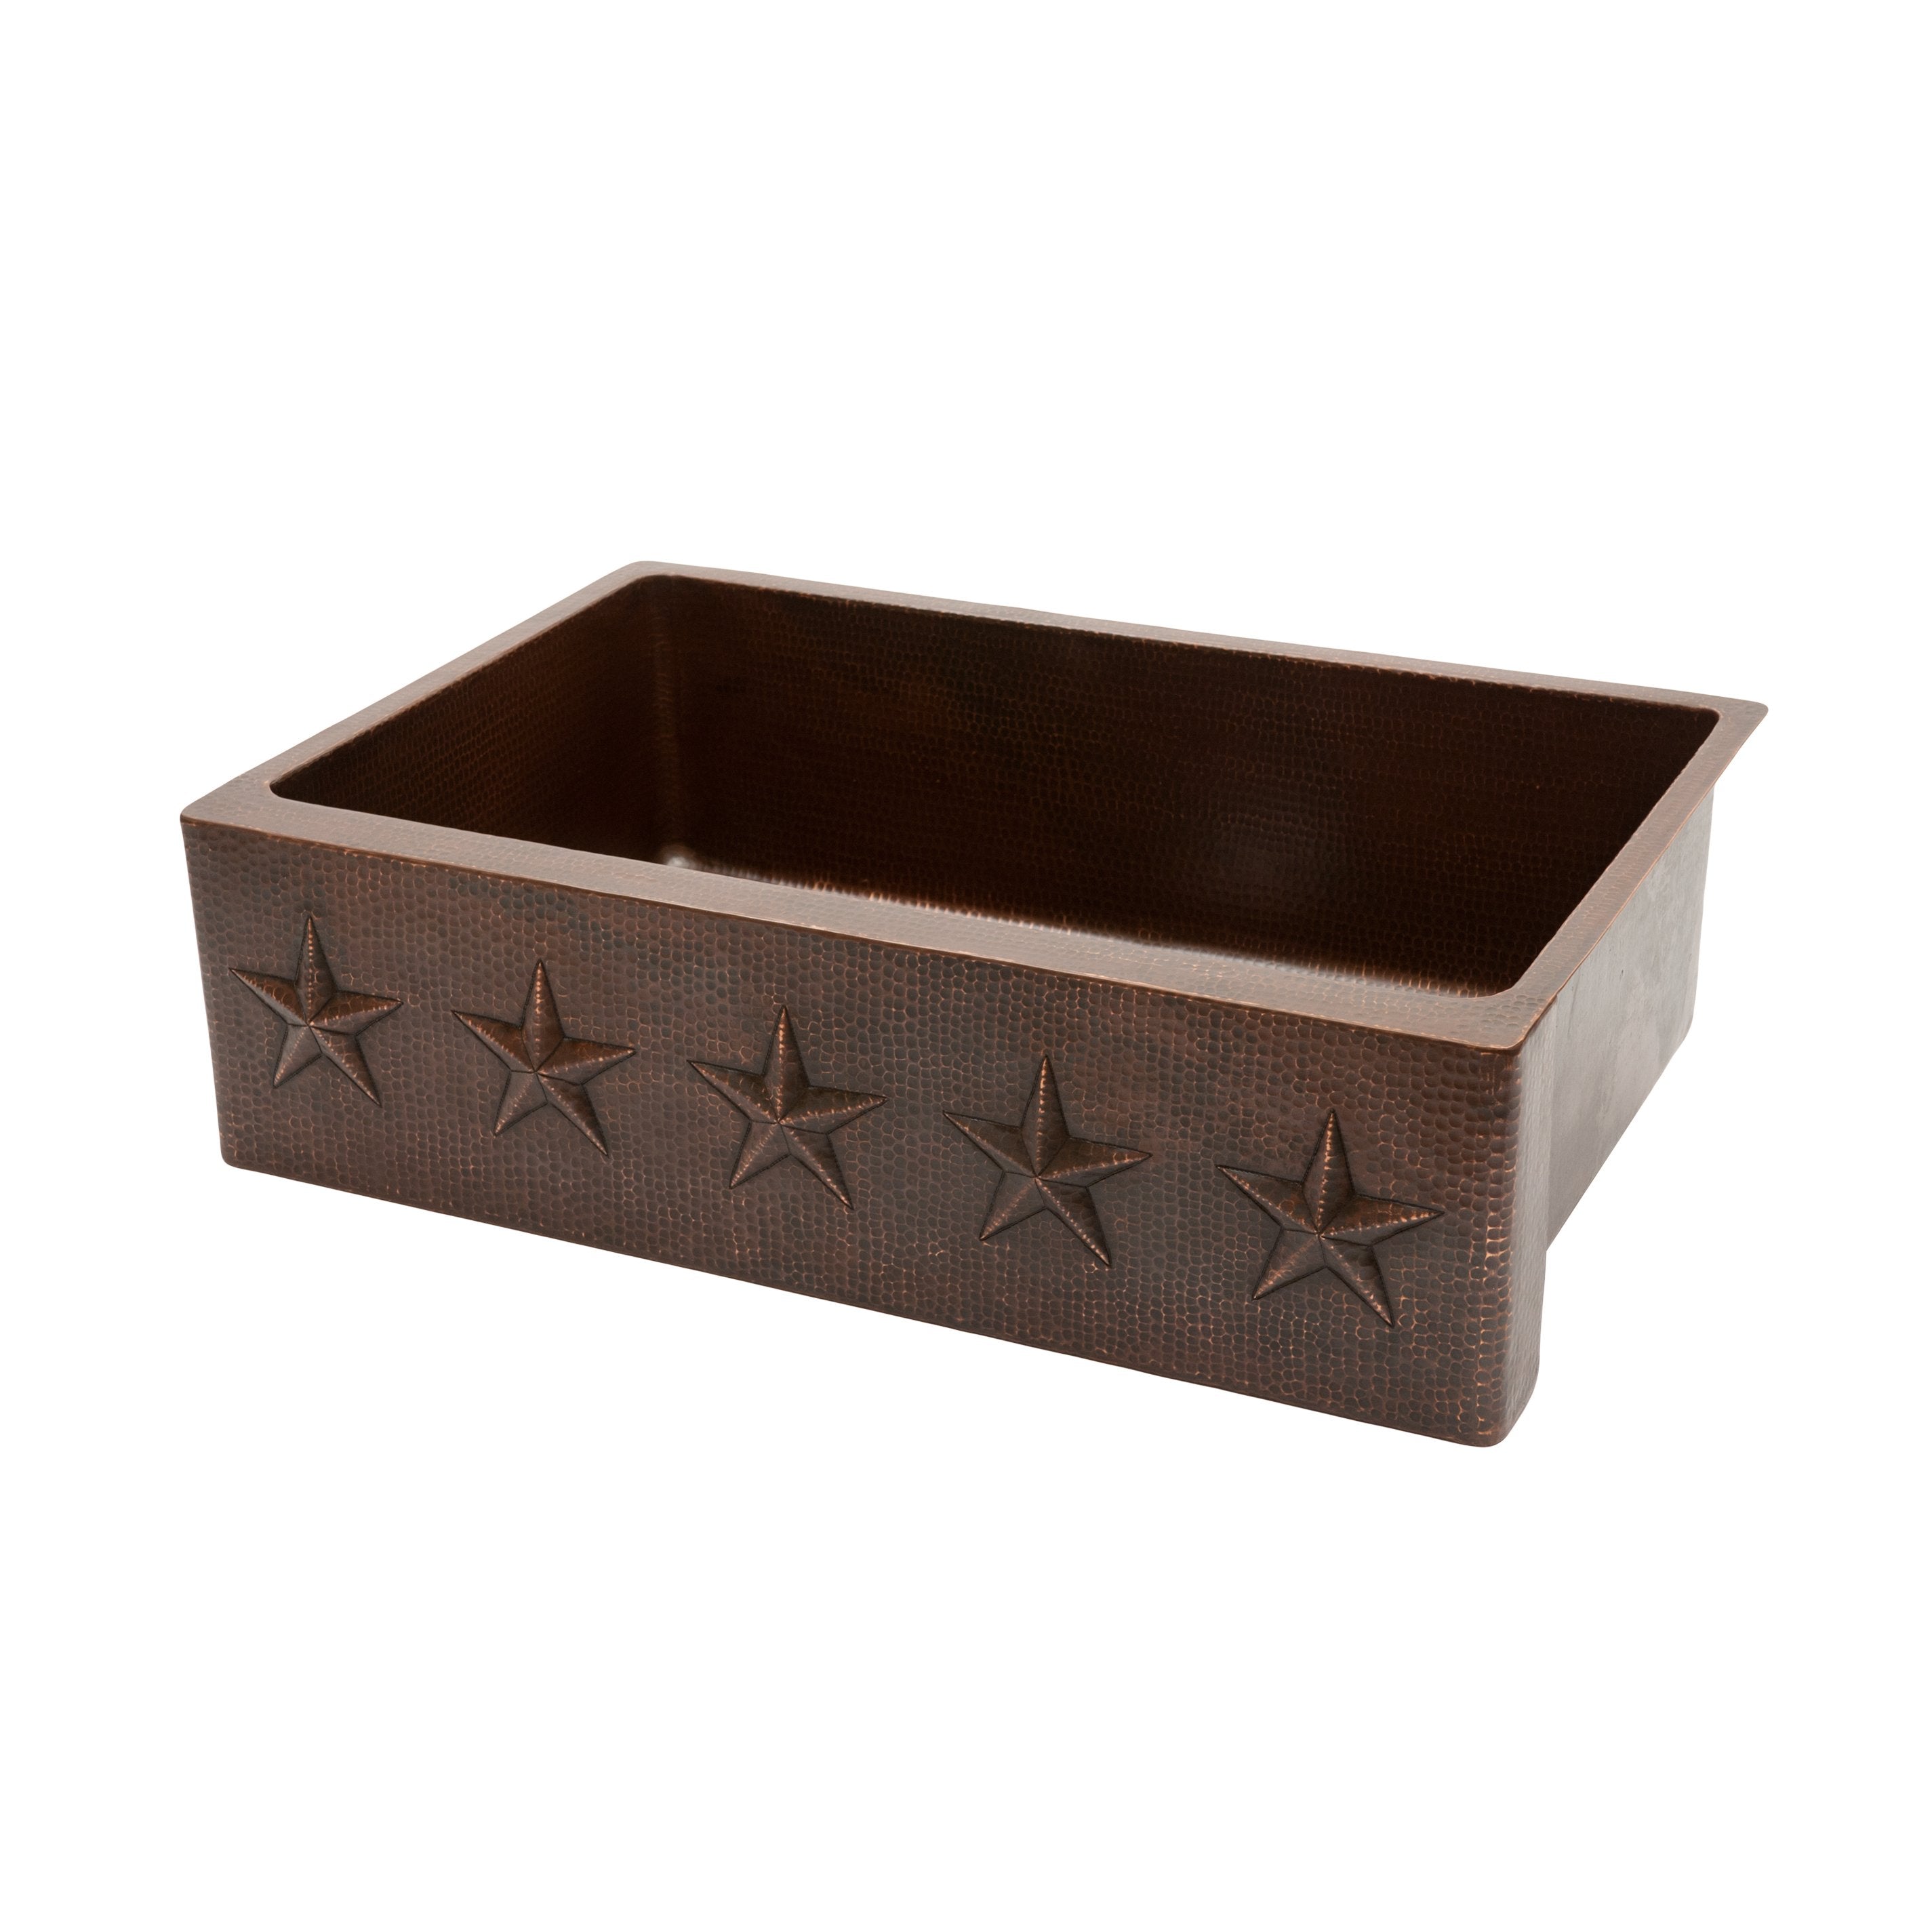 Premier Copper Products 33" Hammered Copper Kitchen Apron Single Basin Sink with Star Design-DirectSinks